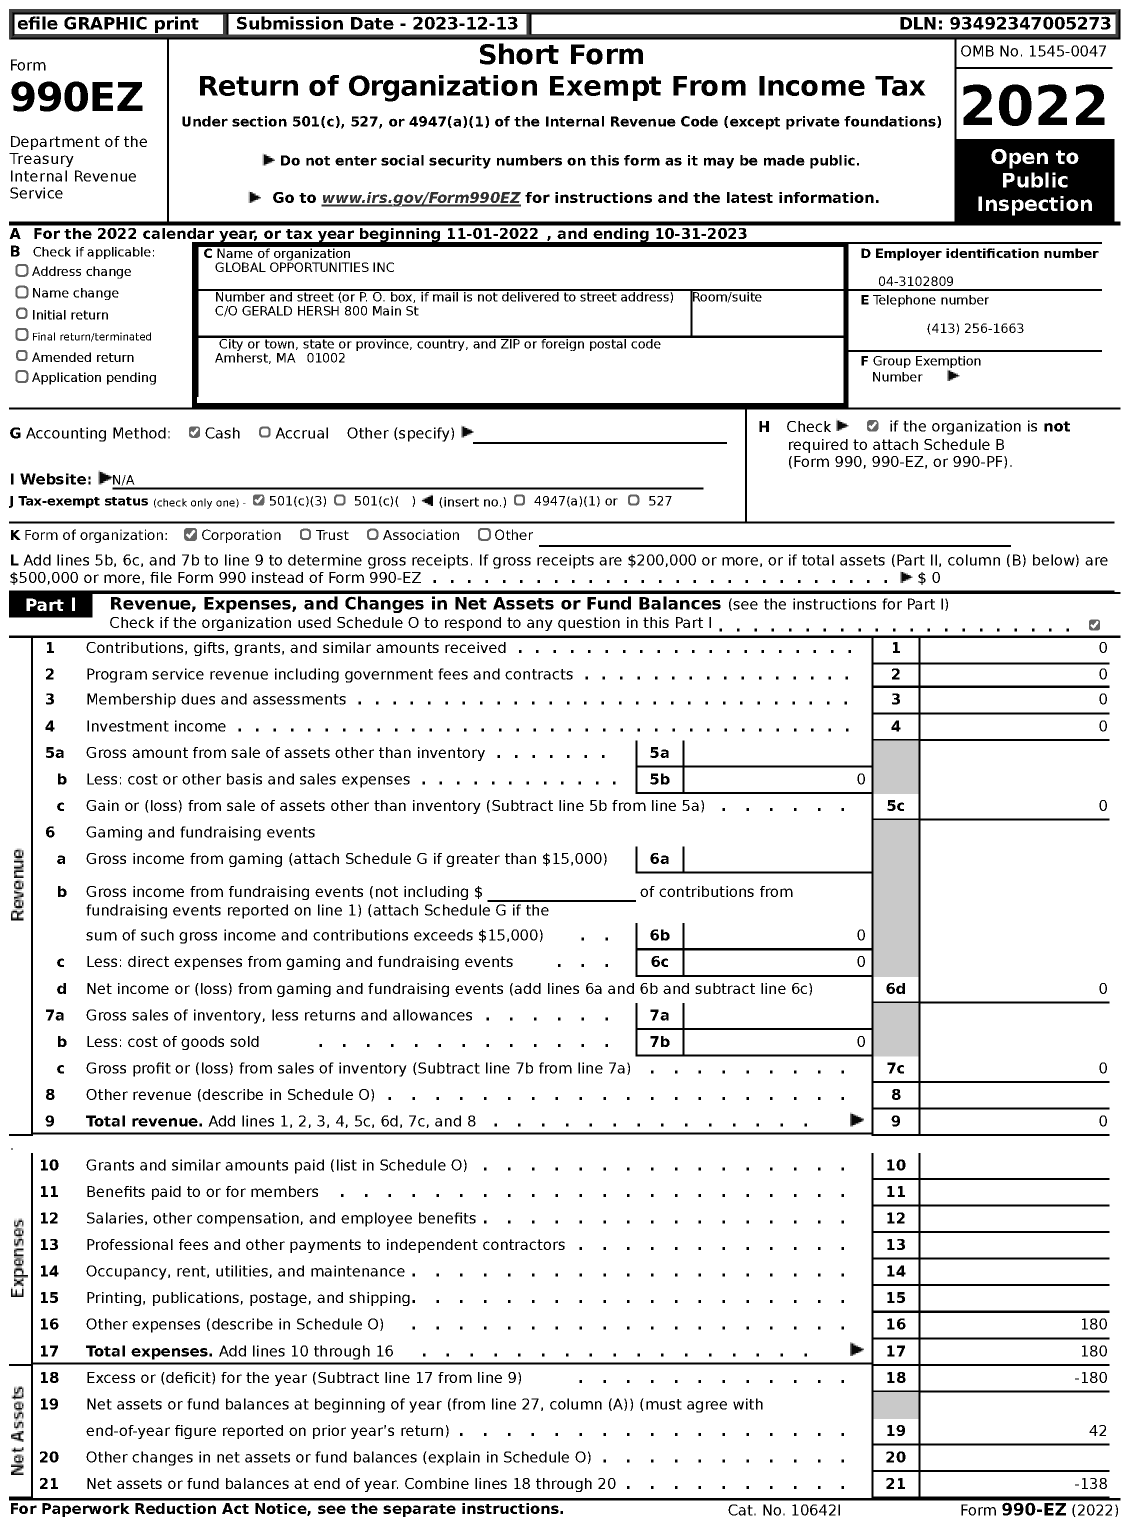 Image of first page of 2022 Form 990EZ for Global Opportunities